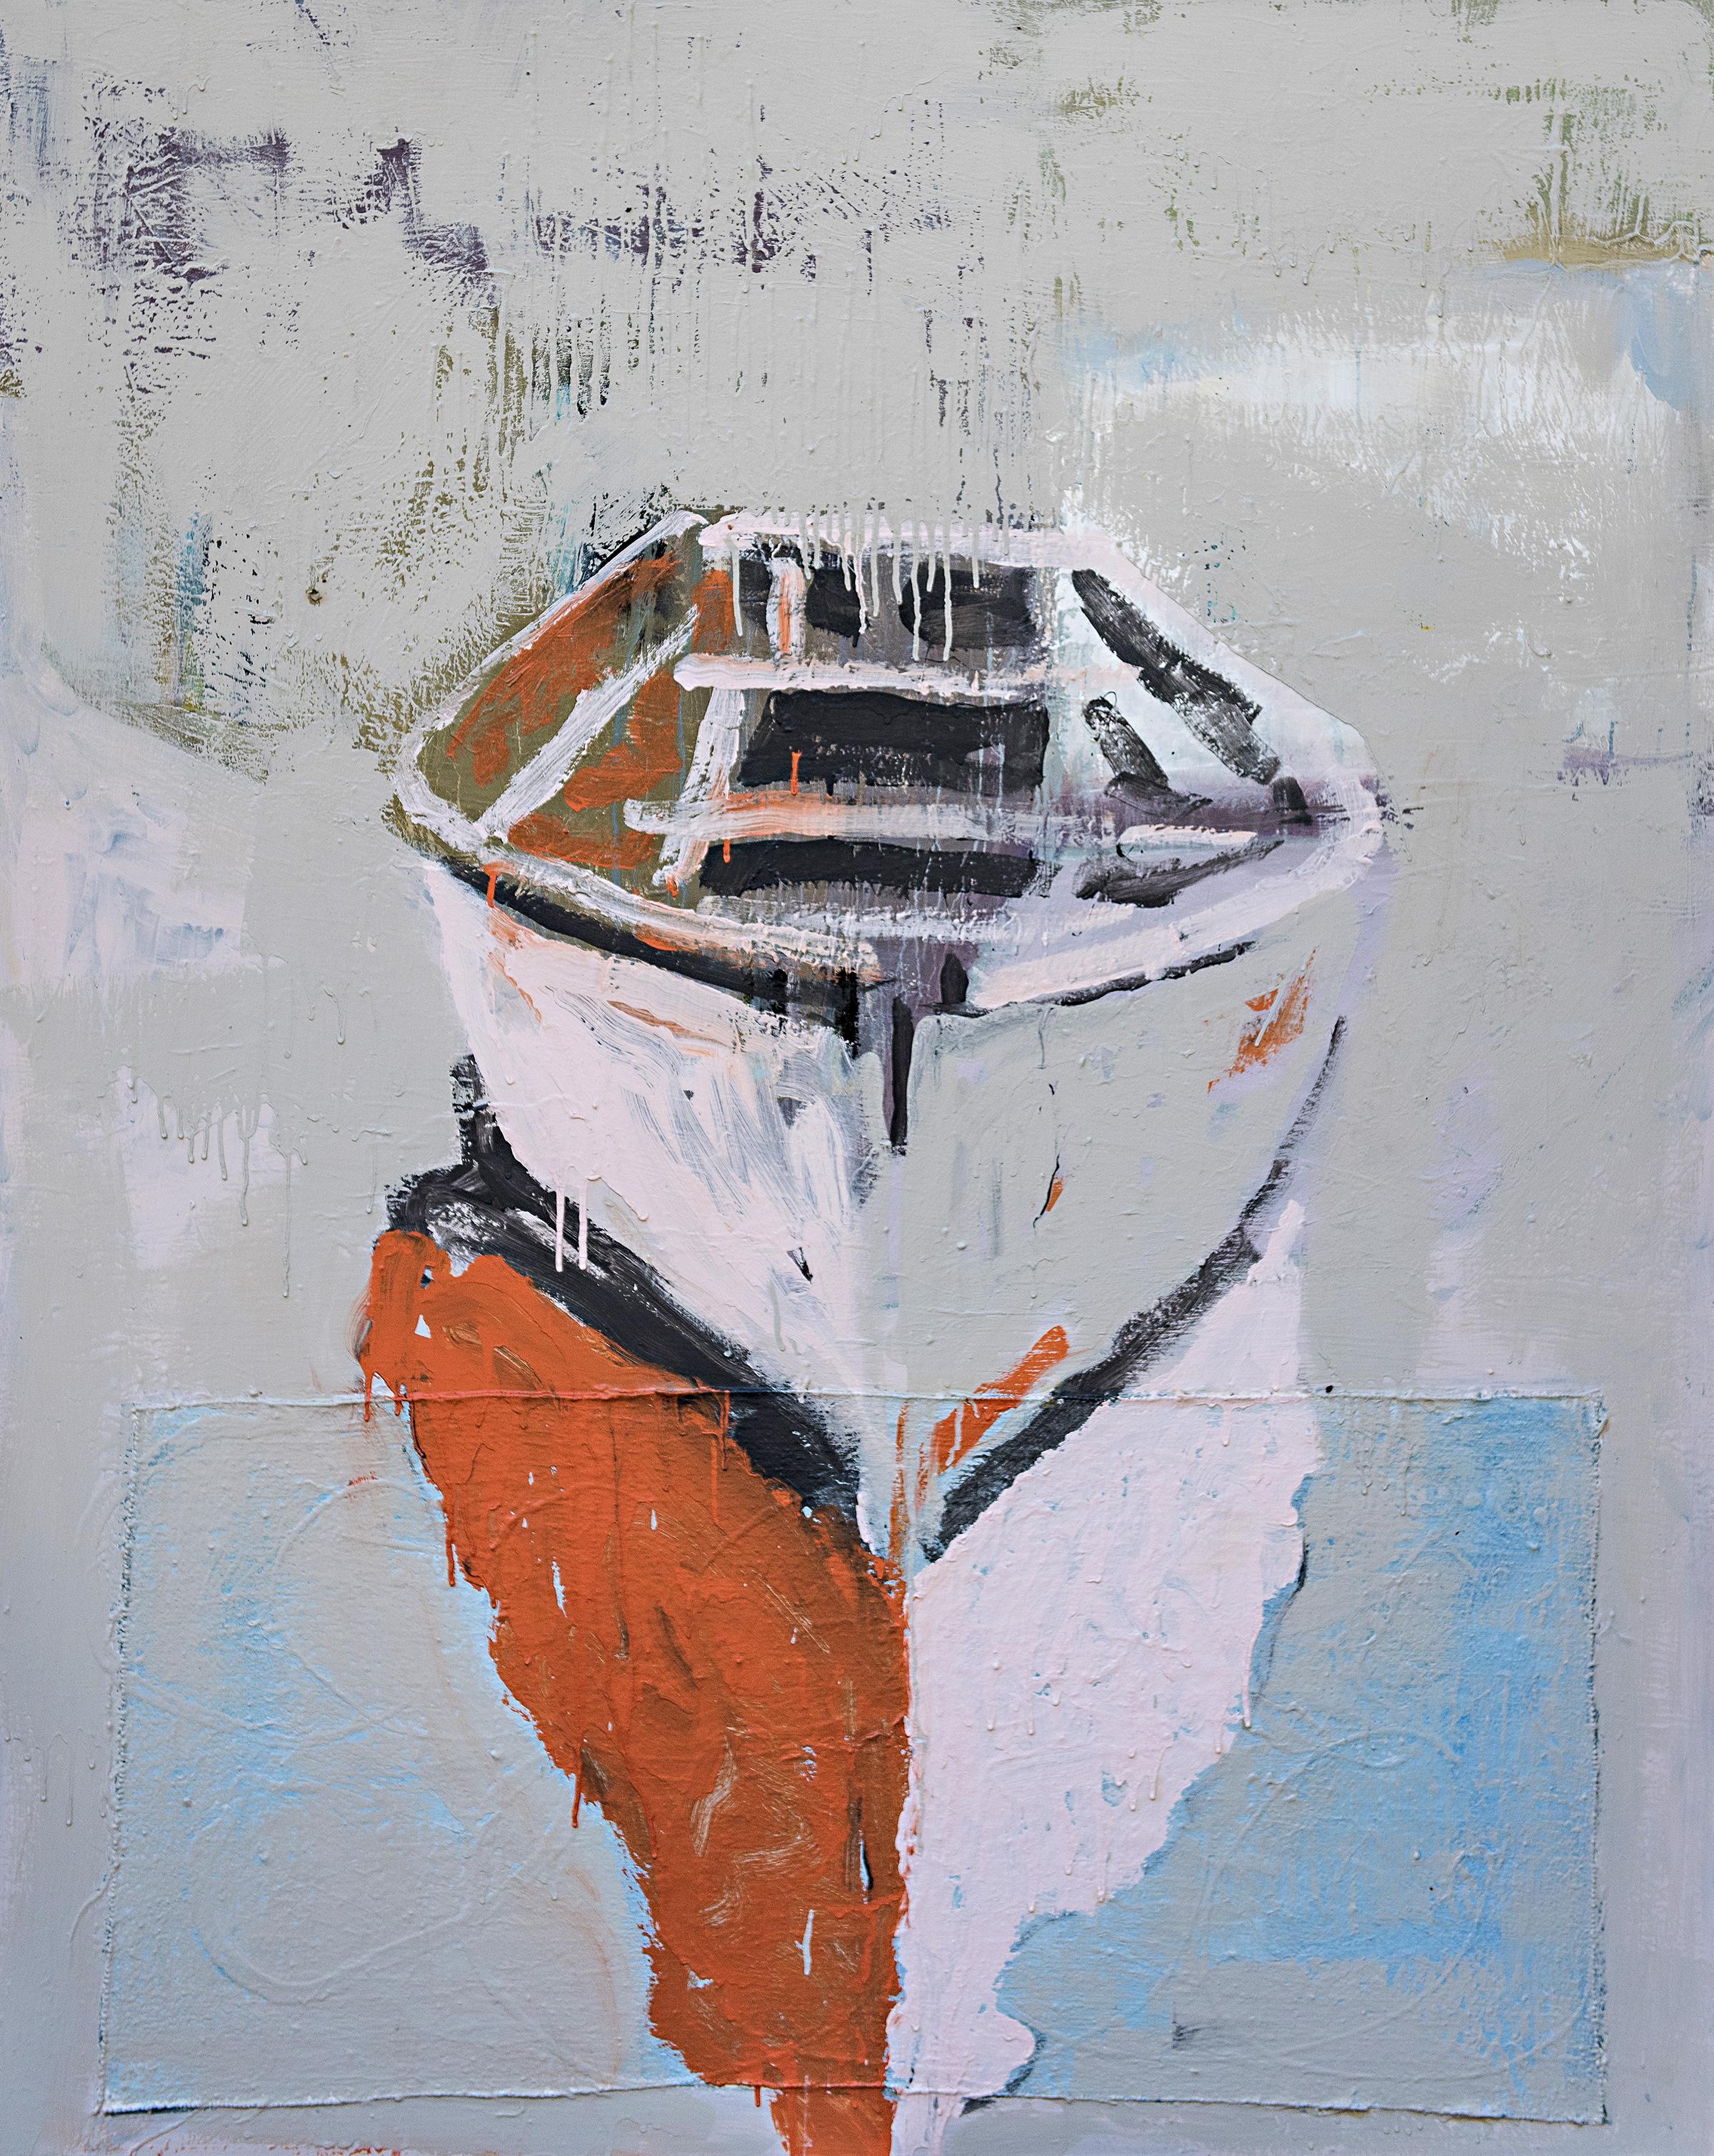 'My Treasure' is a large vertical mixed media on canvas boat painting created by American artist Carylon Killebrew in 2019. Featuring a palette made of white, grey, russet, light pink and blue tones, the painting centers our attention on a simple